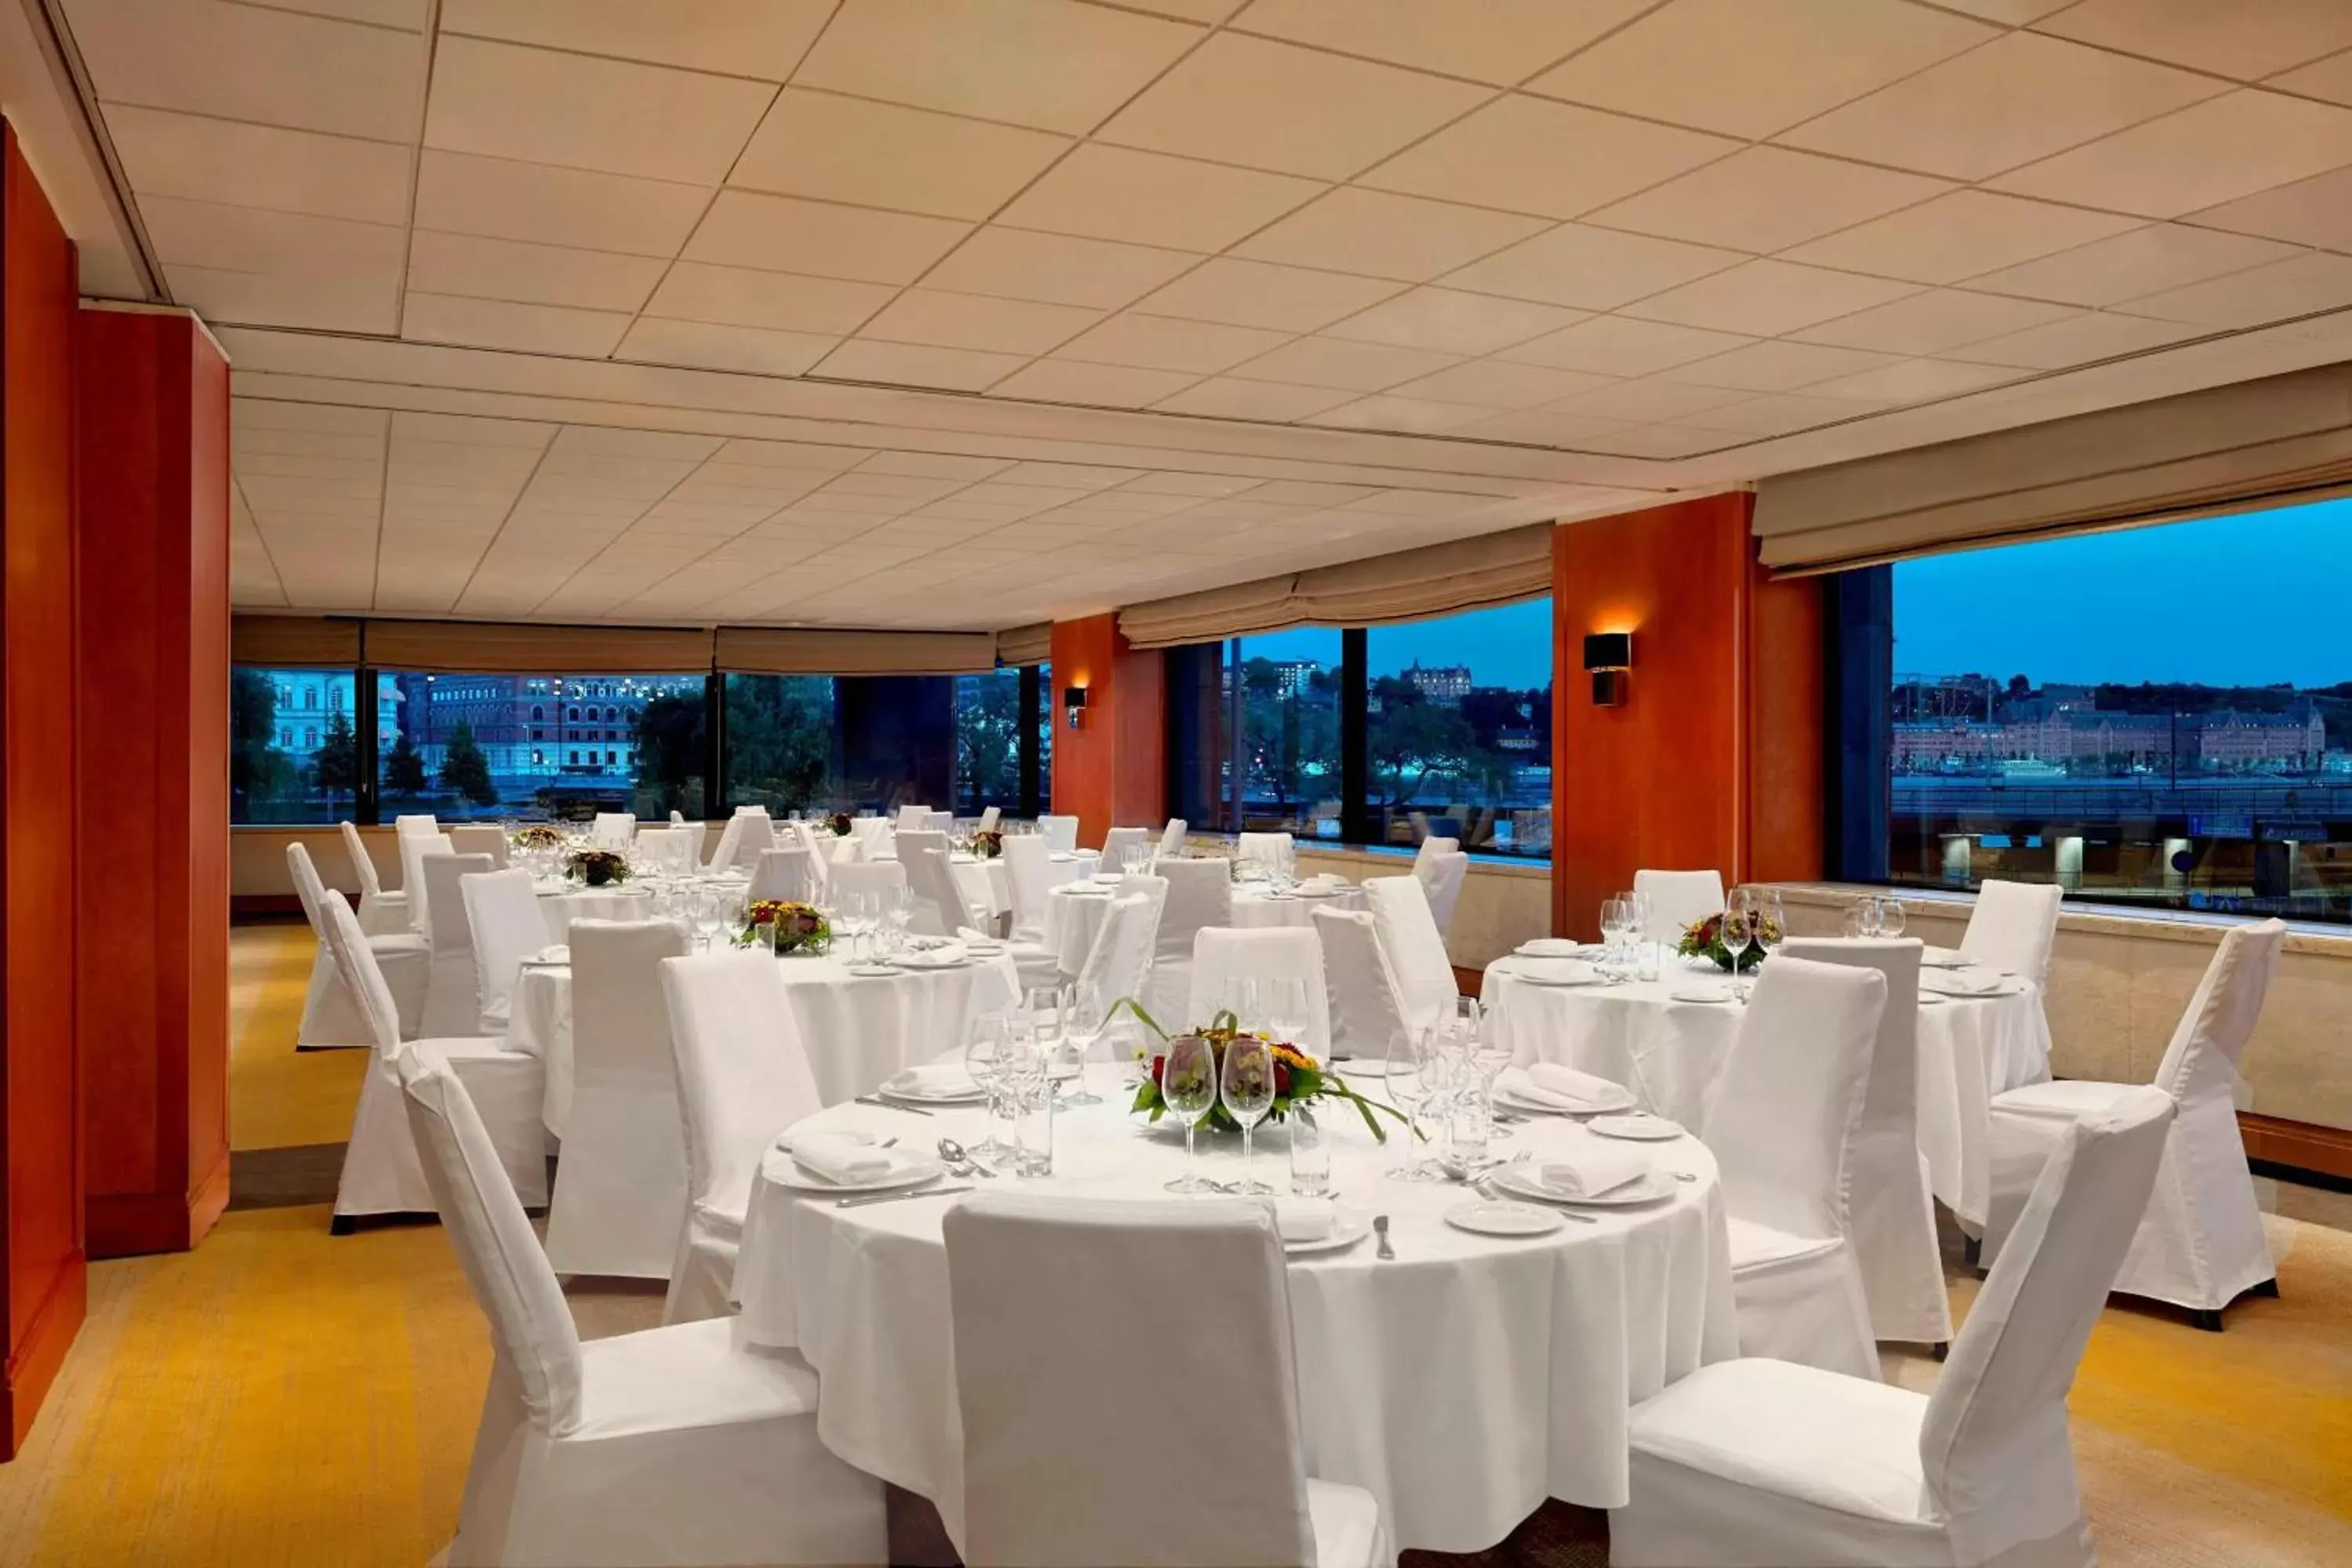 Meeting/conference room, Banquet Facilities in Sheraton Stockholm Hotel